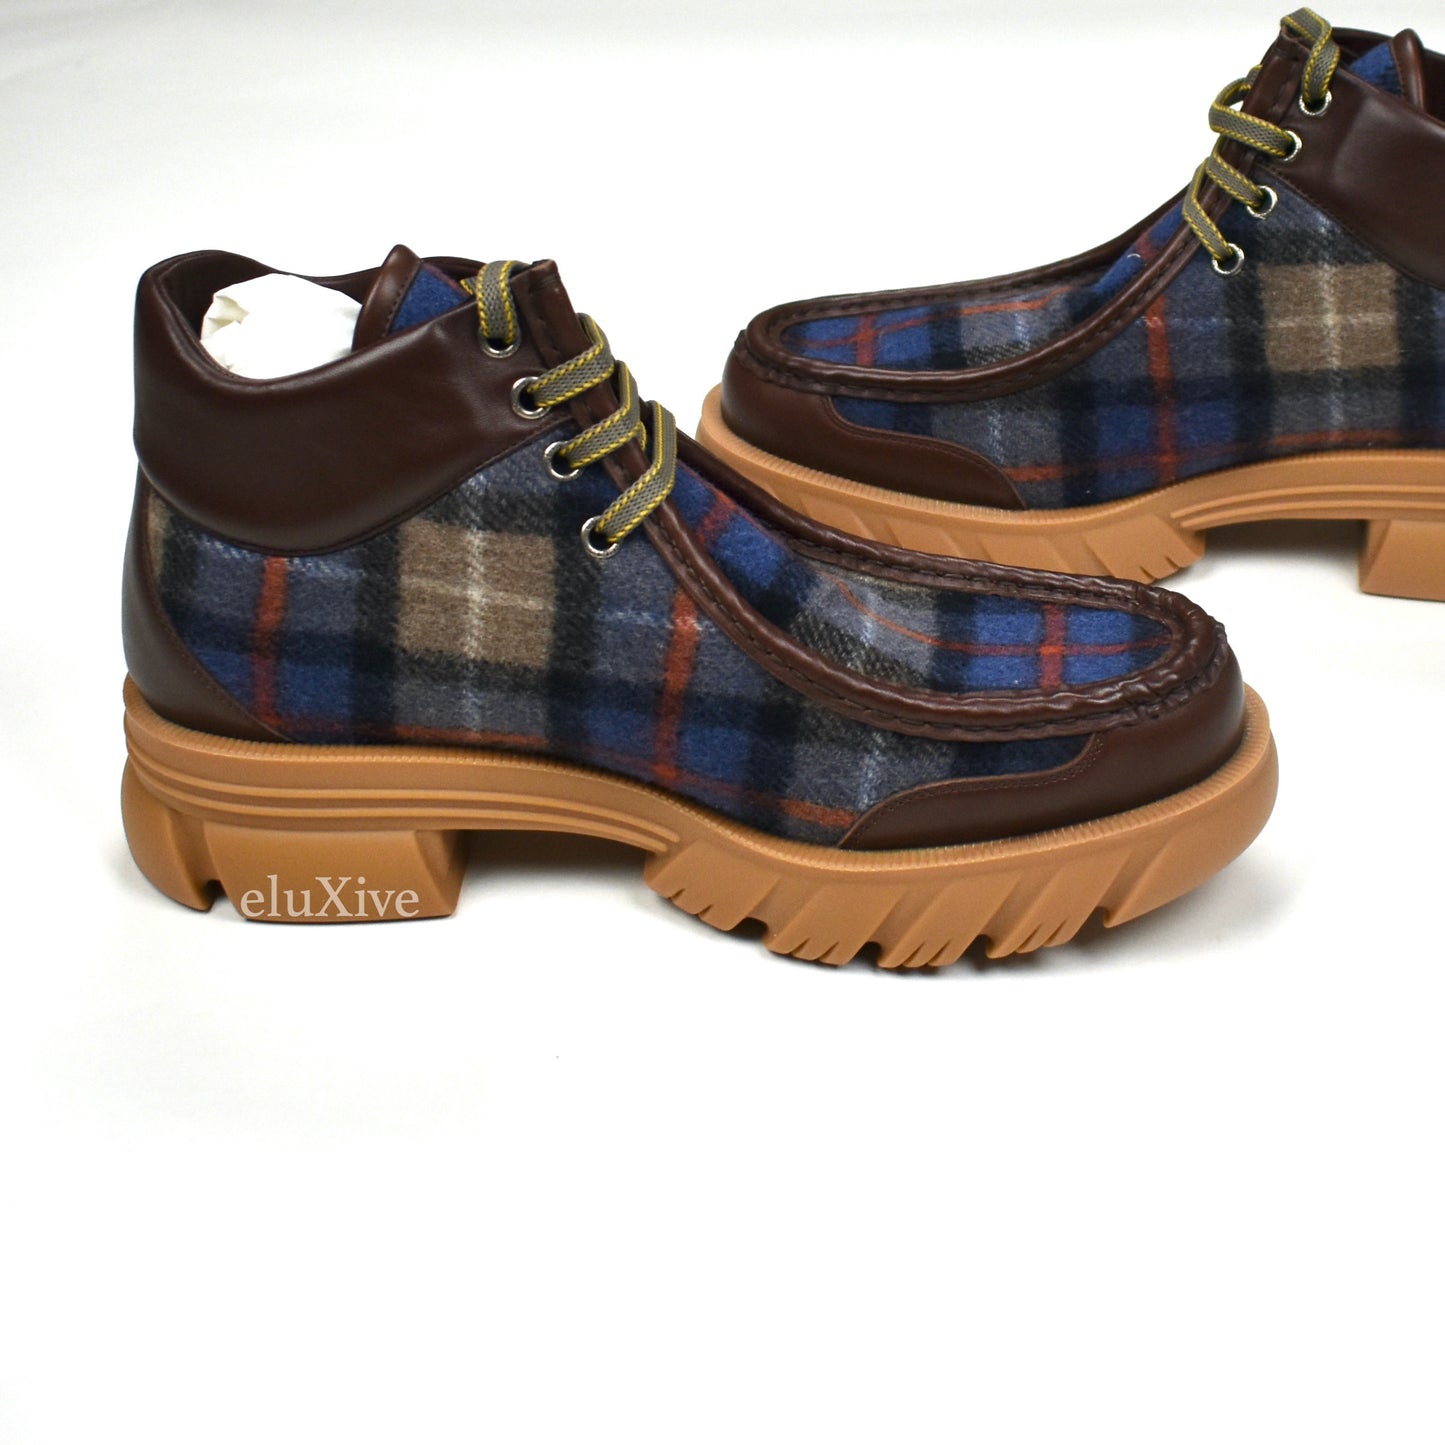 Gucci - Plaid Wool / Leather Chunky Sole Hiking Boots